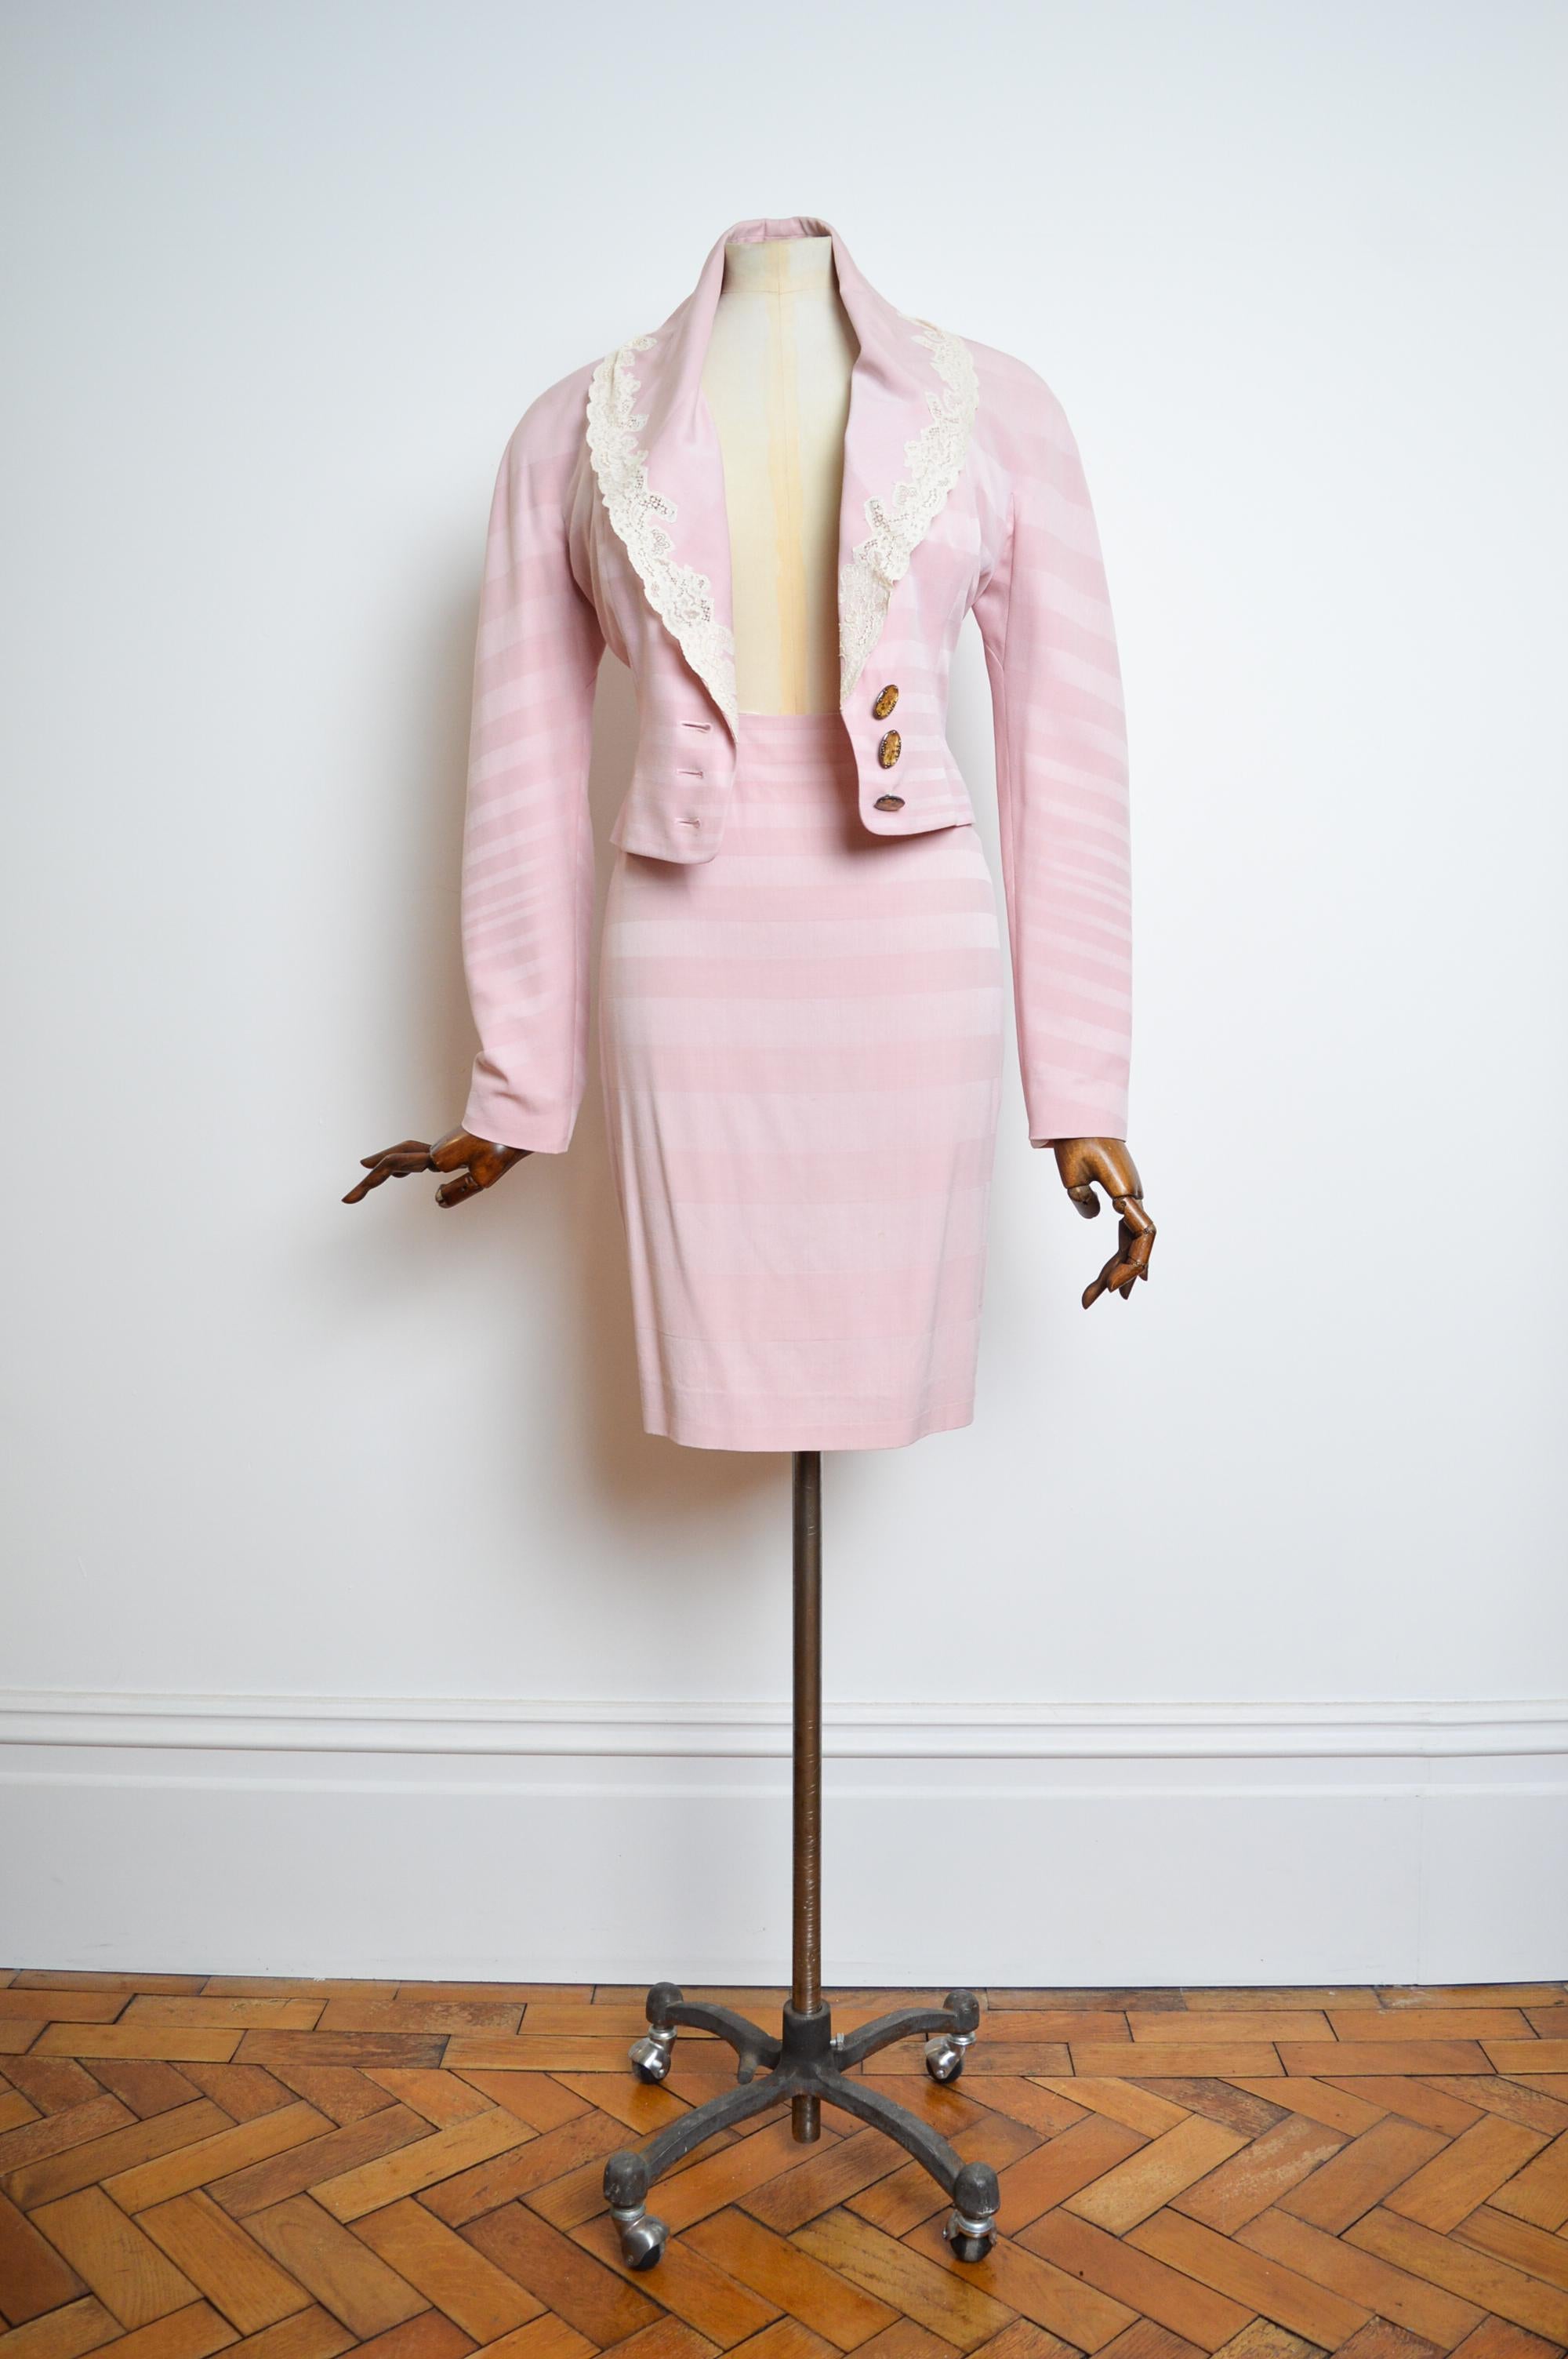 A/W 1999 Christian Dior by John Galliano Pink Lace Jacket & Pencil Skirt set For Sale 11